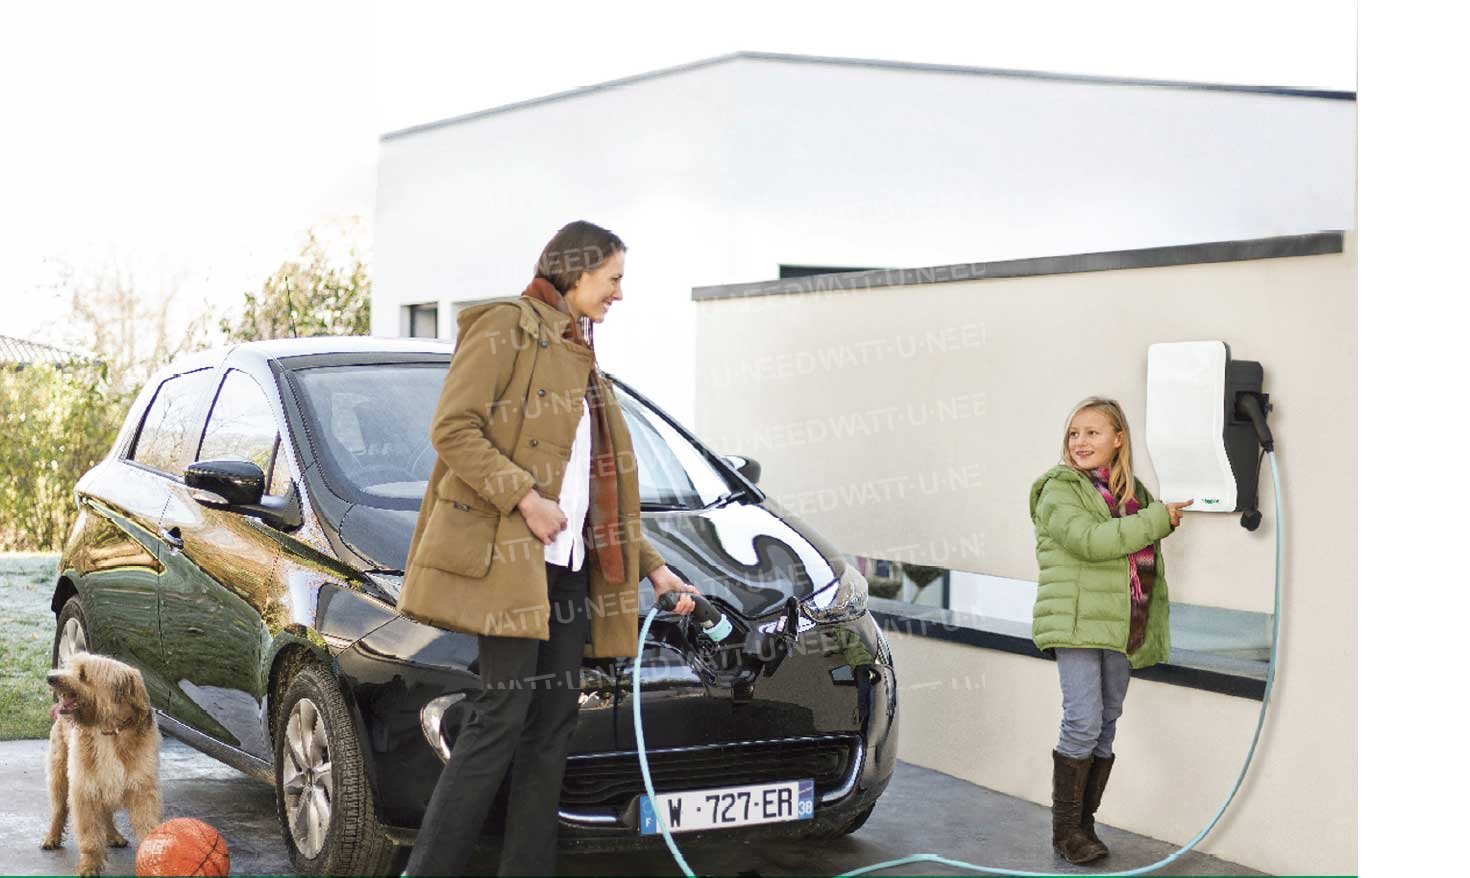 The safe and reliable solution for the rapid charging of electric vehicles